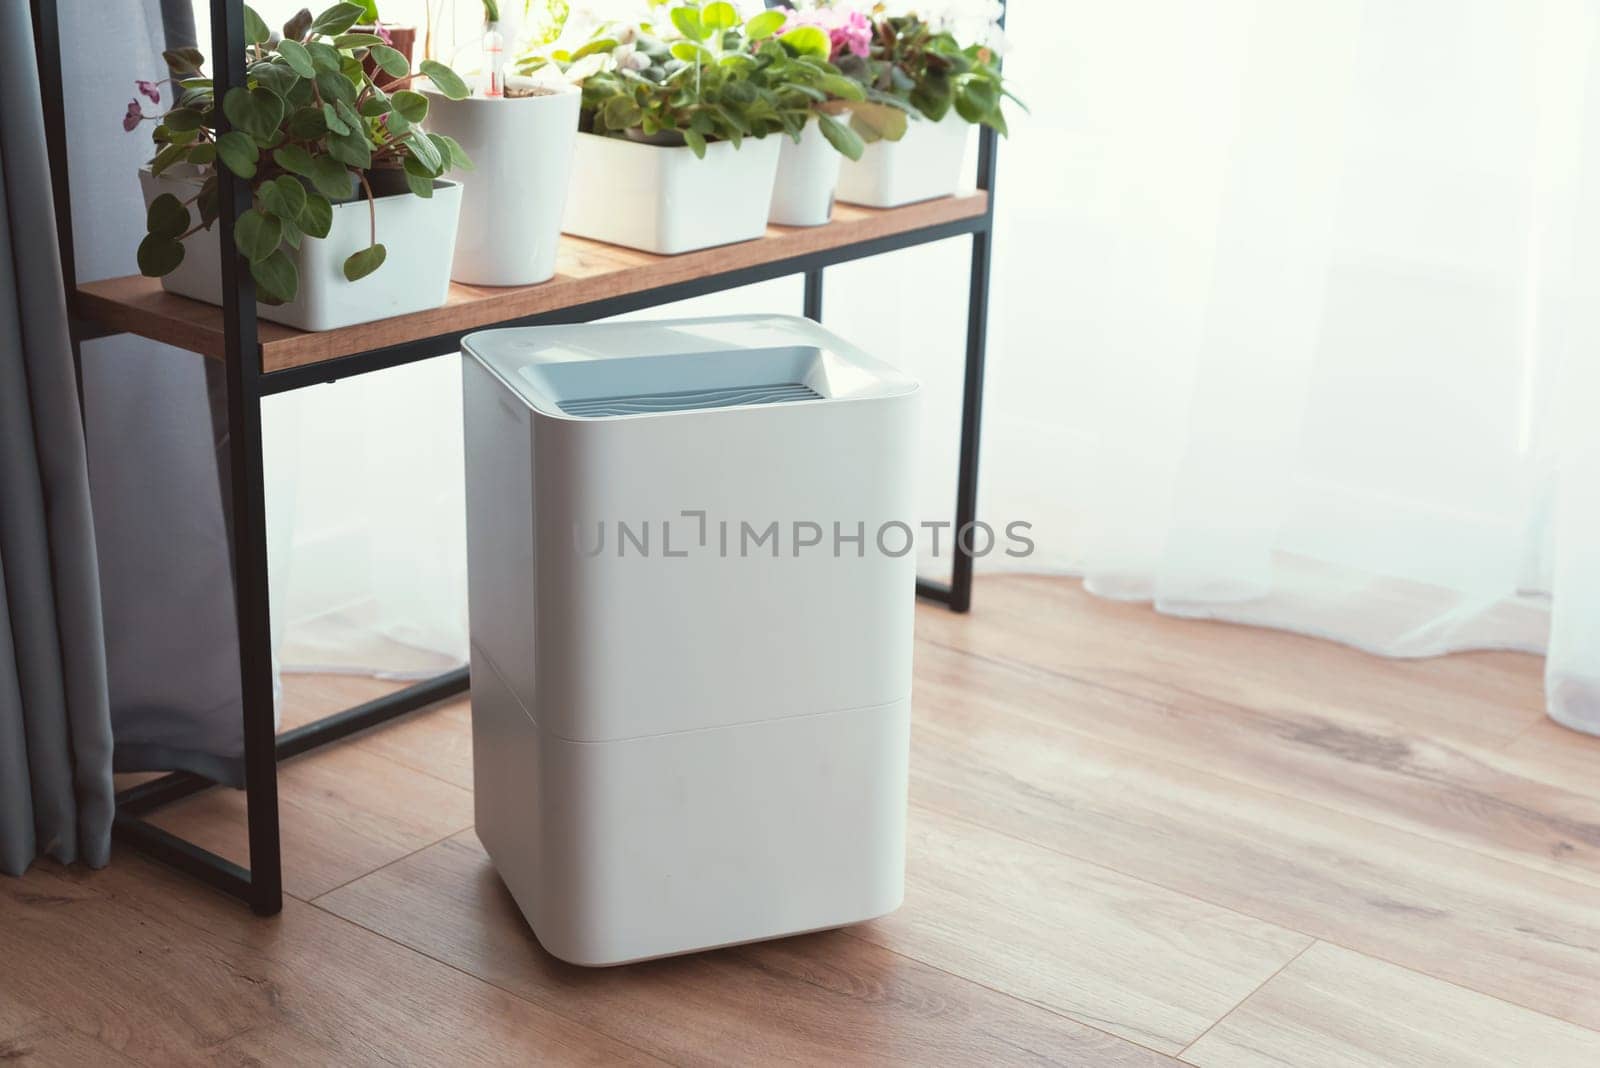 Modern air humidifier in living room by simpson33